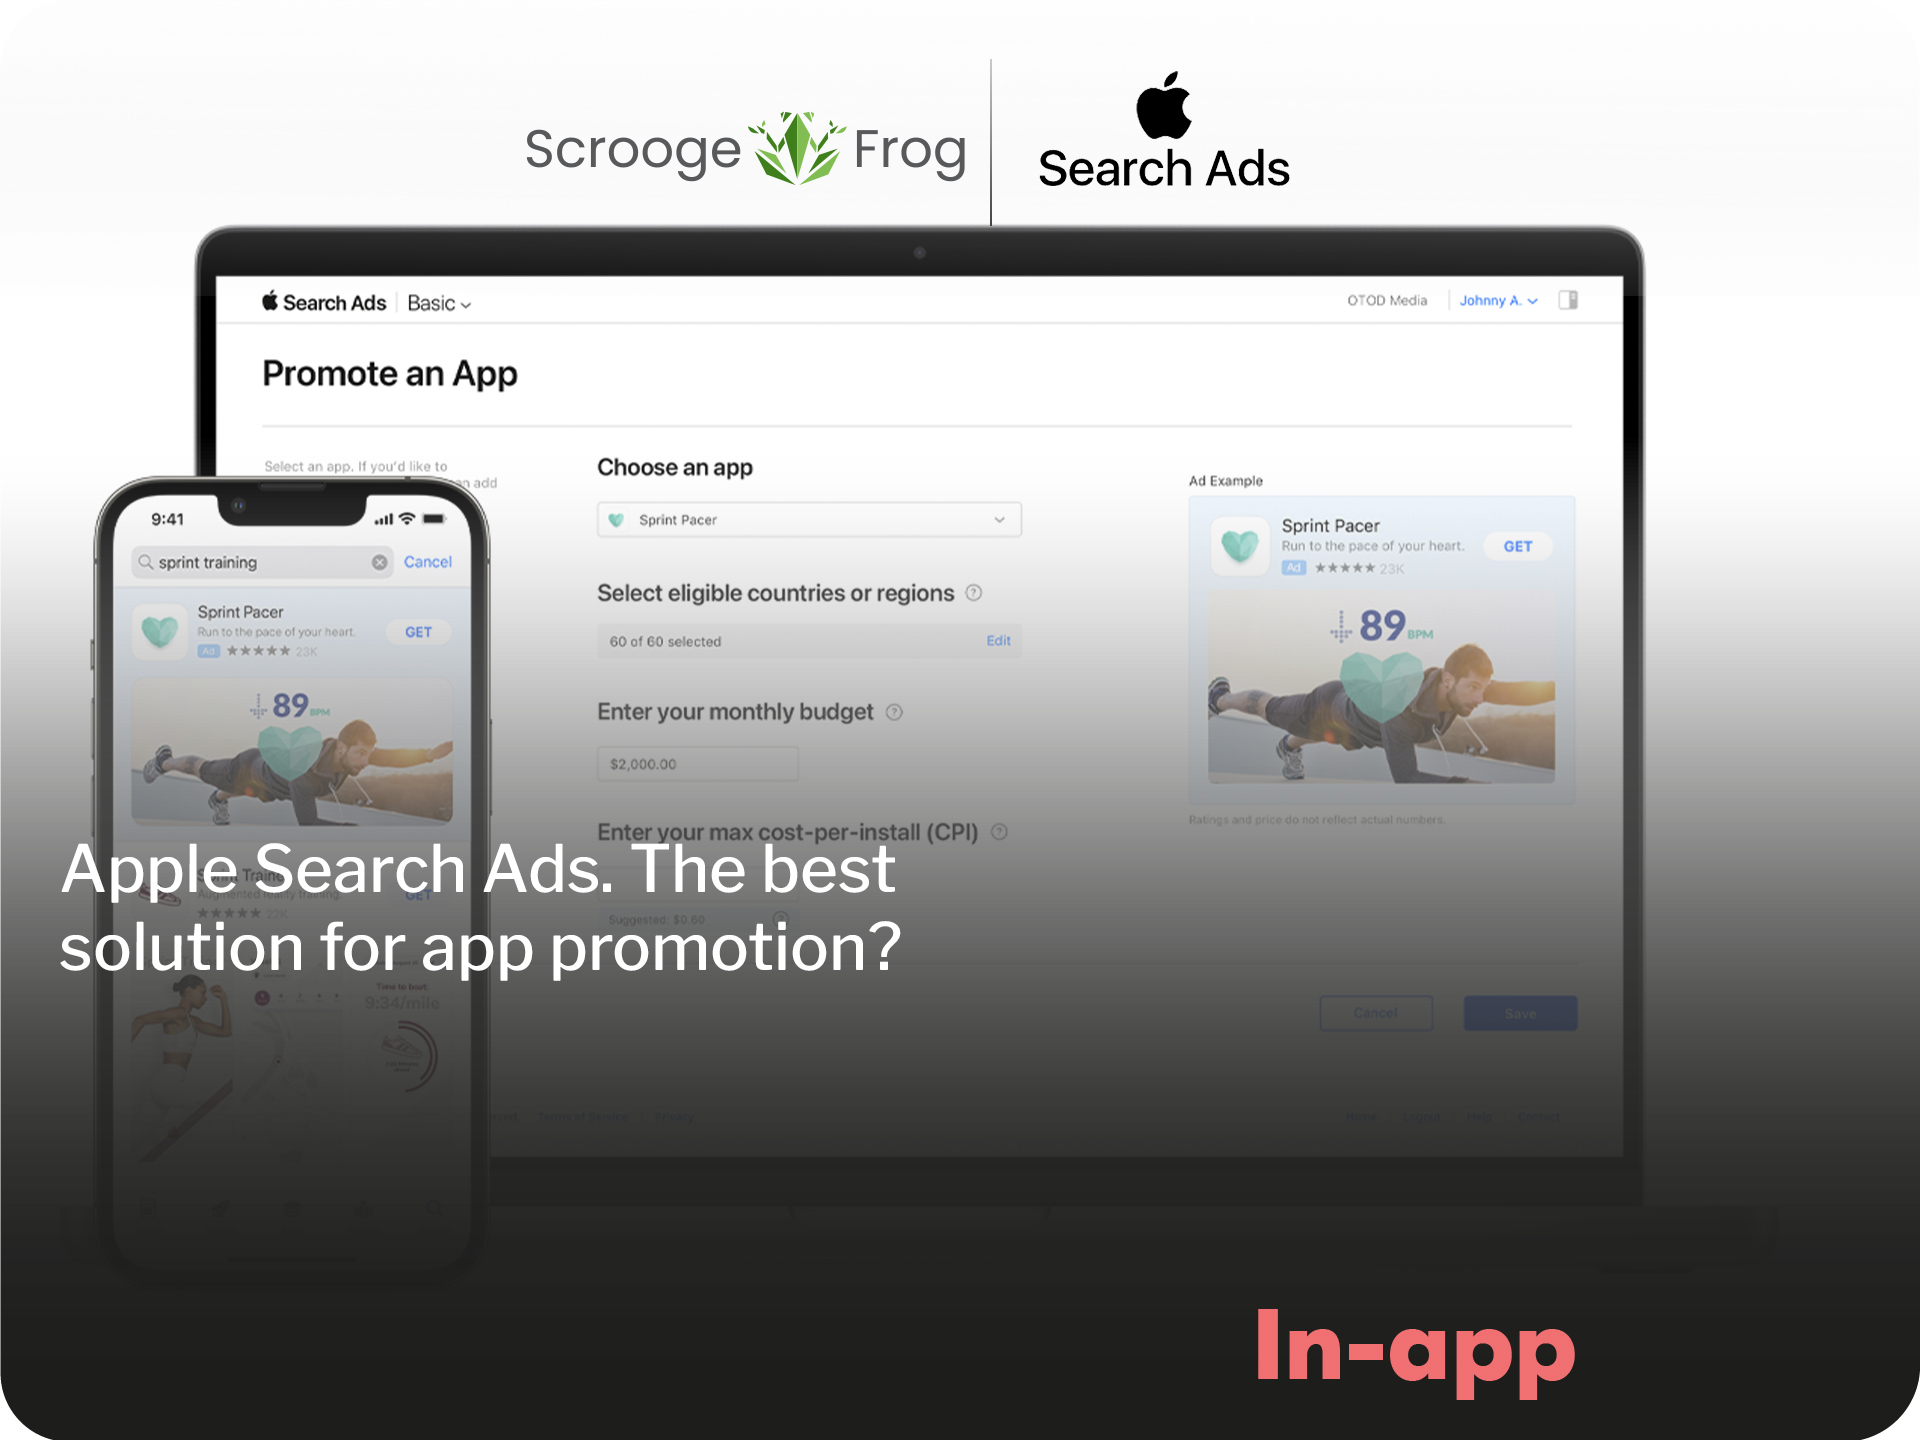 Apple Search Ads. The best solution for app promotion?